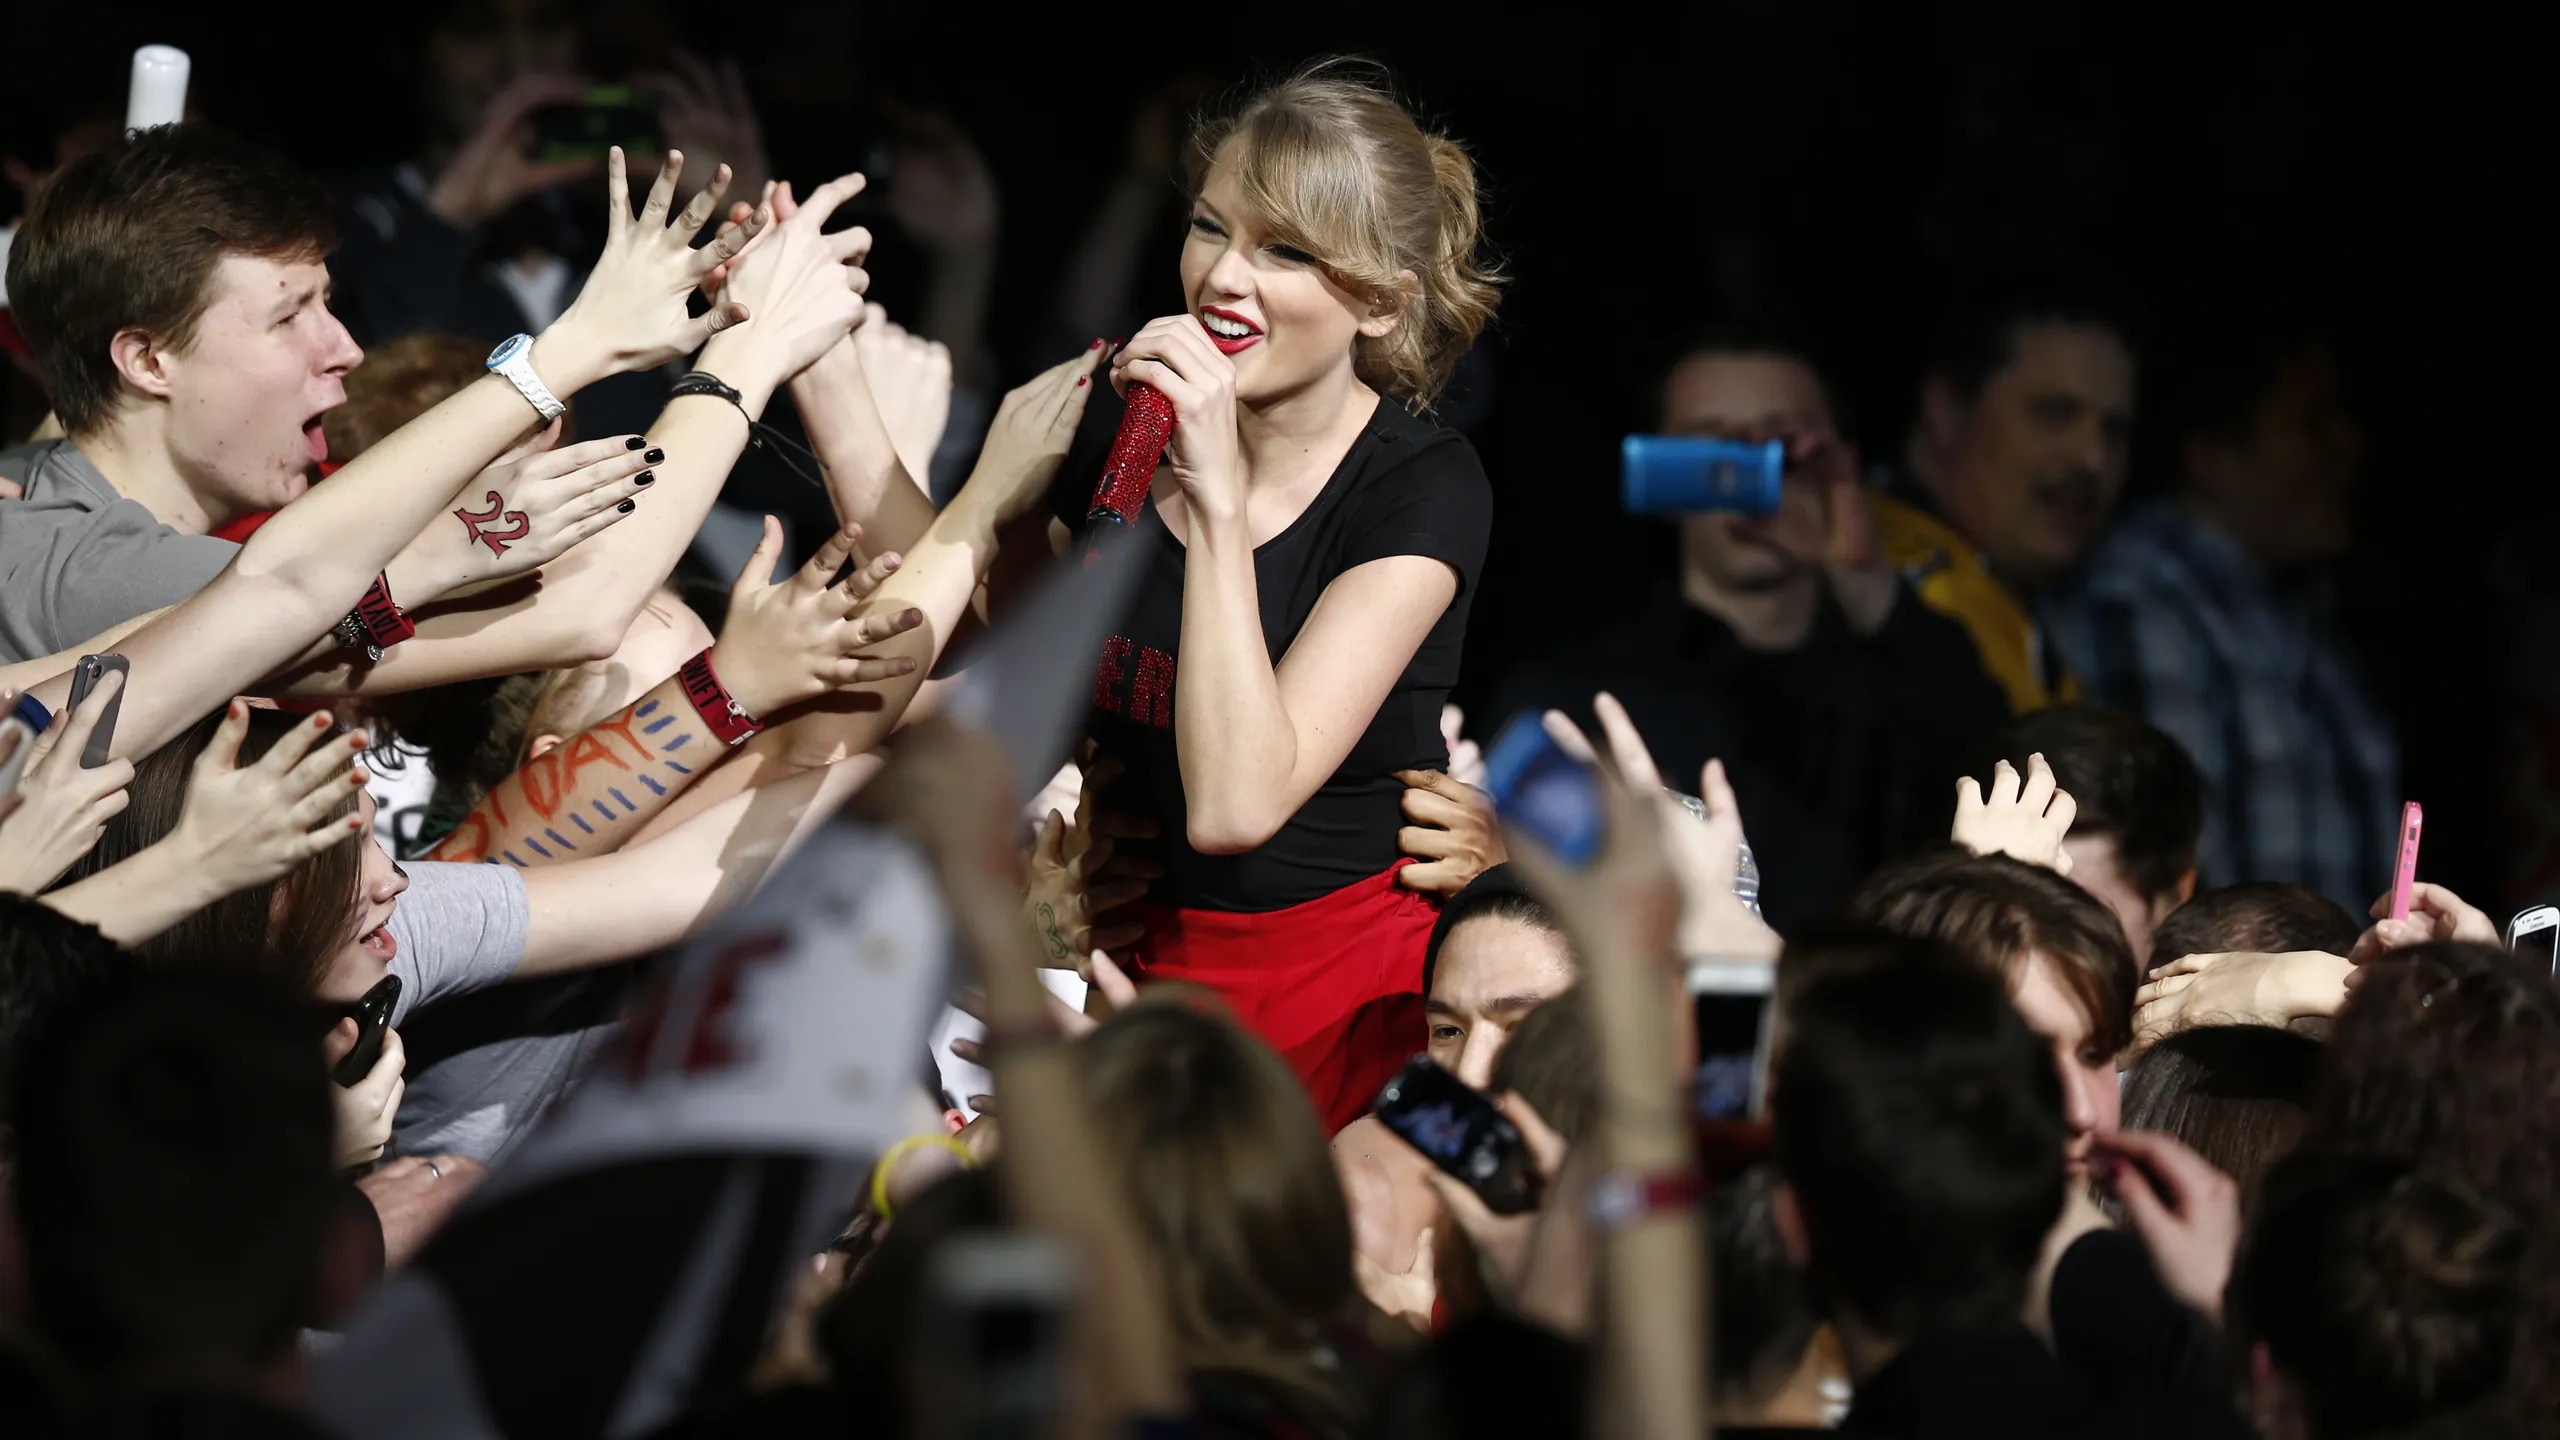 Top 39 Awesome Gifts For Taylor Swift Fans That Make Any Swifties Jump for Joy